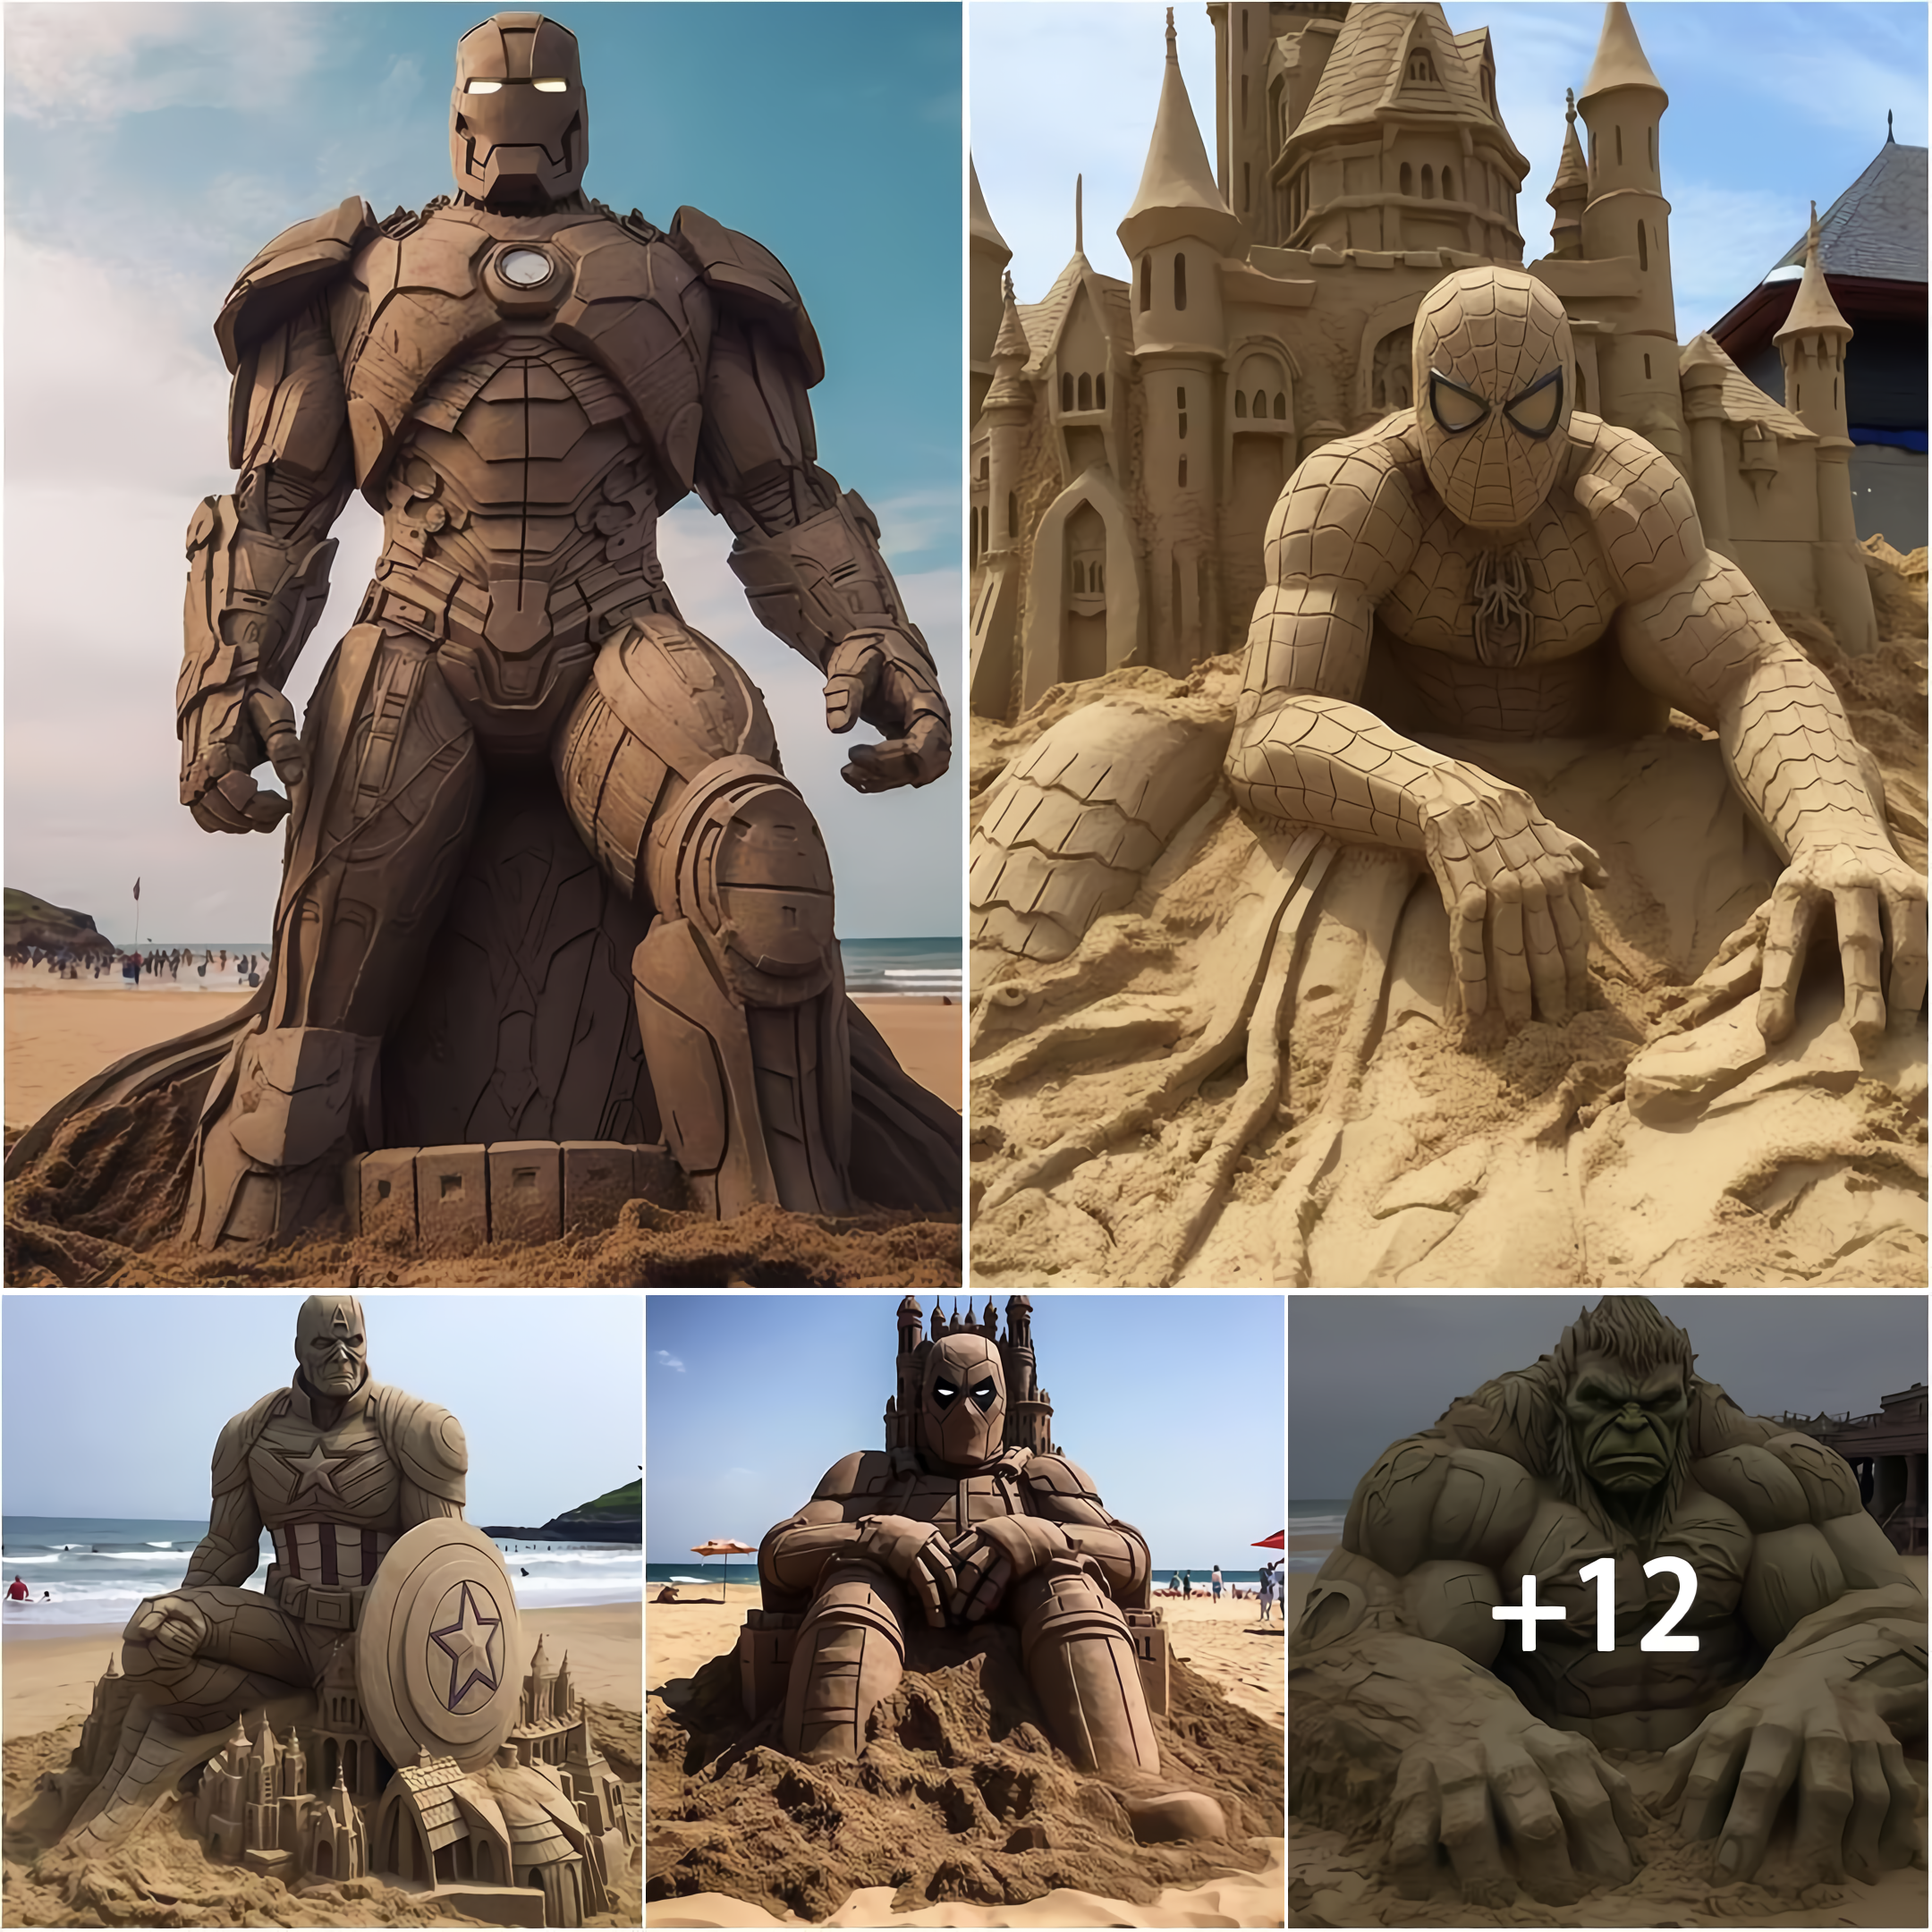 the iconic character of the Marvel Universe is brought to life in an extraordinary performance of sand sculpting. Marvel at the intricate details and skilled craftsmanship as these beloved superheroes and villains are meticulously carved from grains of sand. from the mighty thunder God wielding his hammer to the web-swiping Spider-Man ready for action, each sculpture captures the essence of these legendary figures with astonishing precision. Get ready to be immersed in a world where imagination meets sands and where art has no limits. #MarvelSculptures #SandArtistry #IncredibleCraftsmanship #SuperheroMagic #ArtisticMarvels #MarvelUniverseAwakens